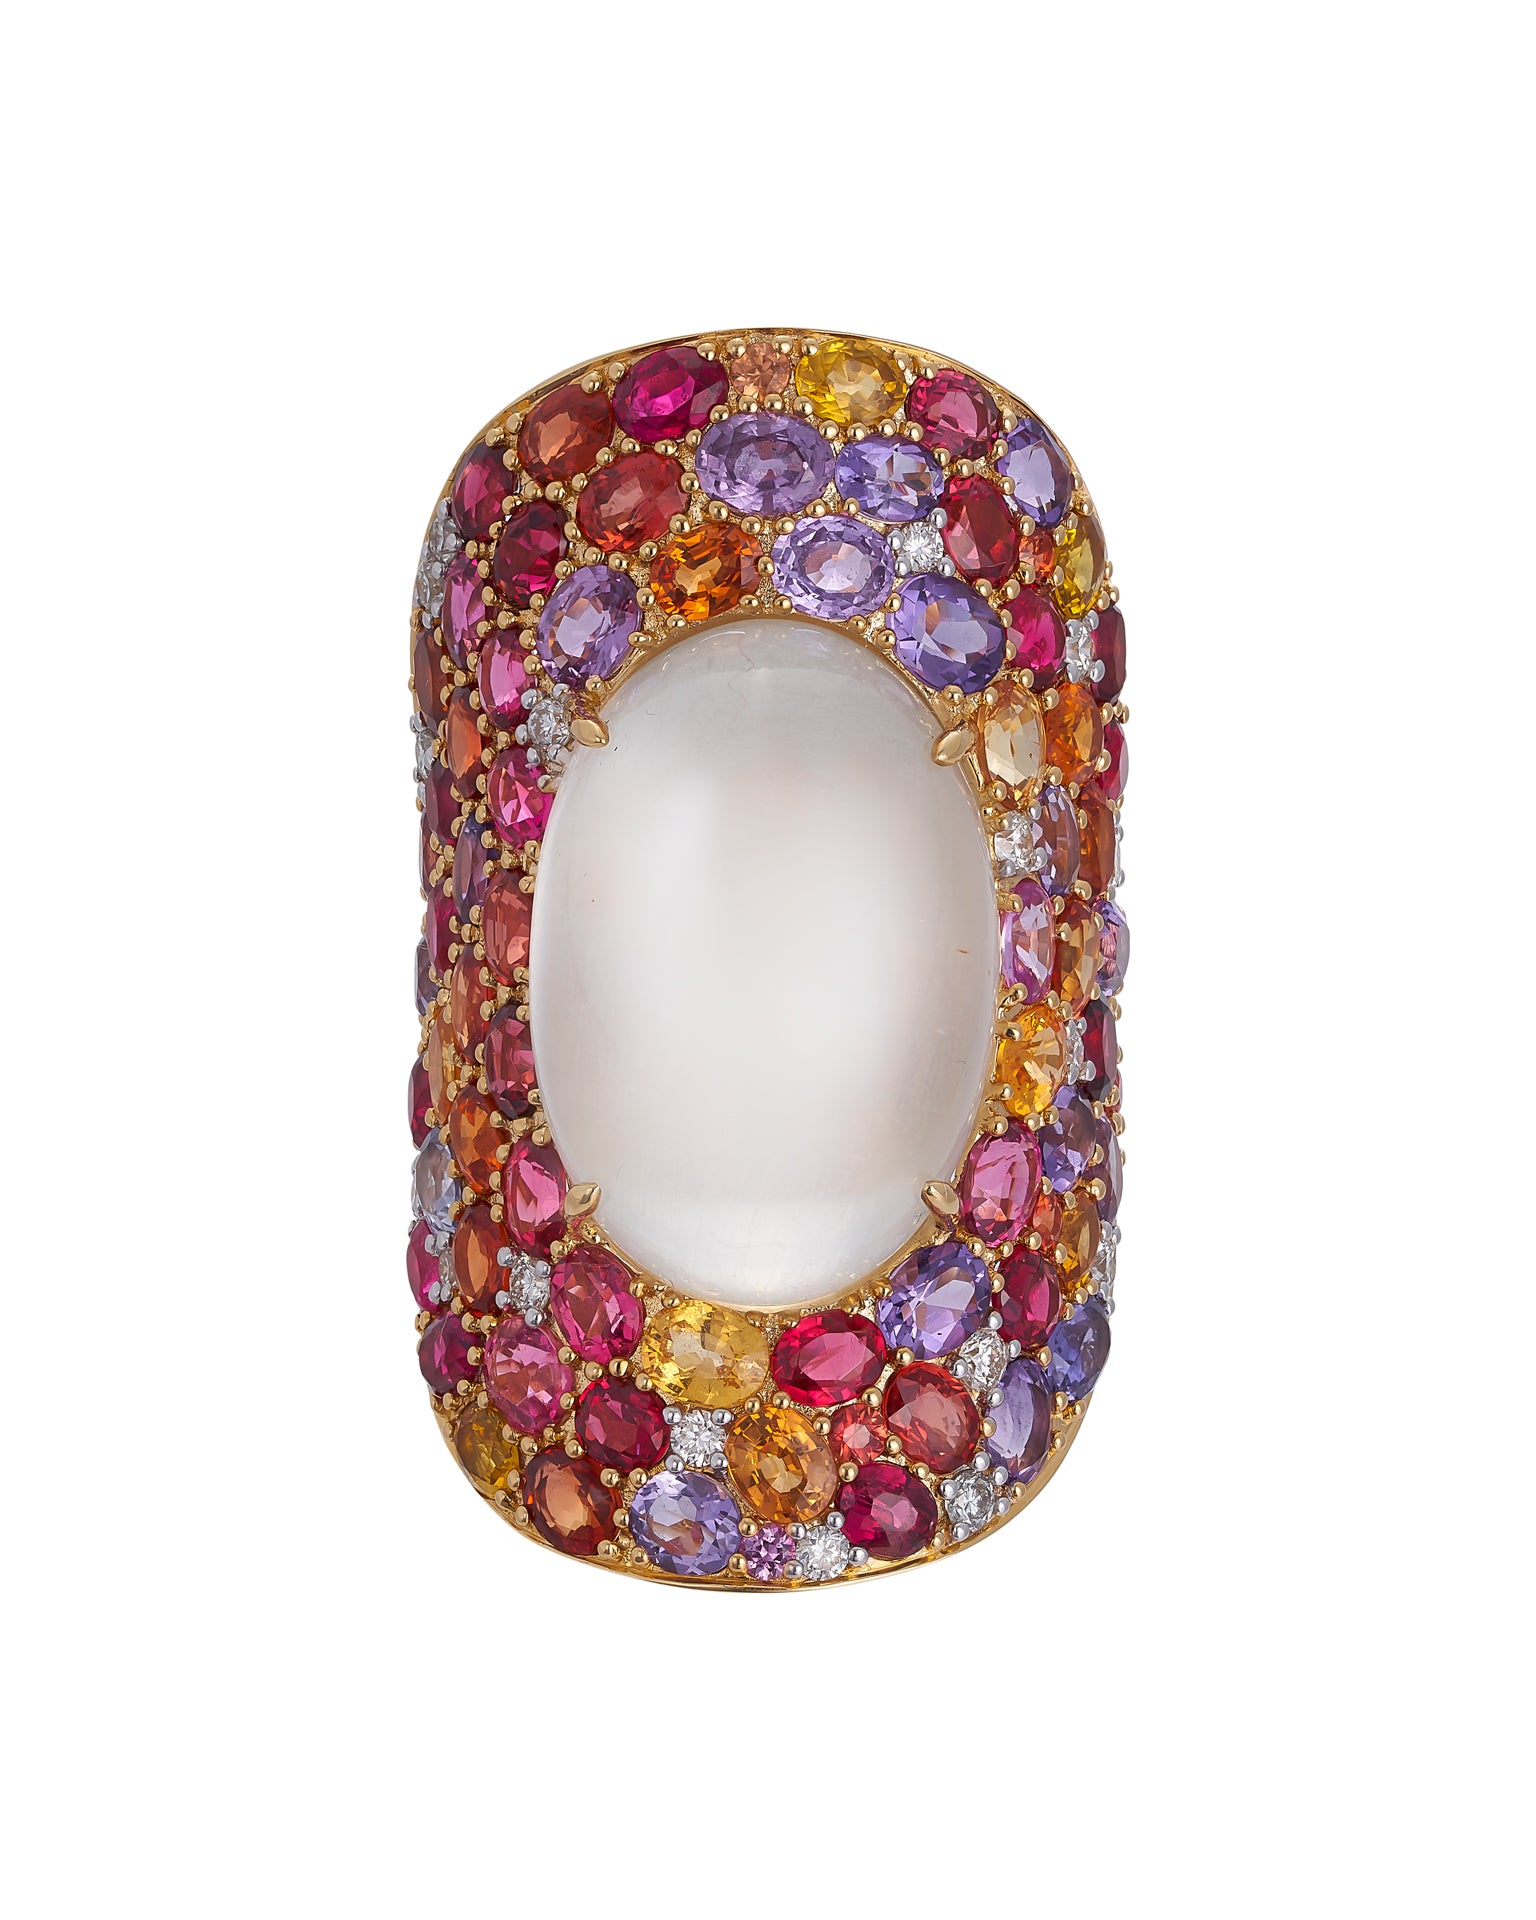 ‘Aura’ Moonstone Ring enhanced with diamonds and a myriad of gemstones, crafted in 18 karat yellow gold